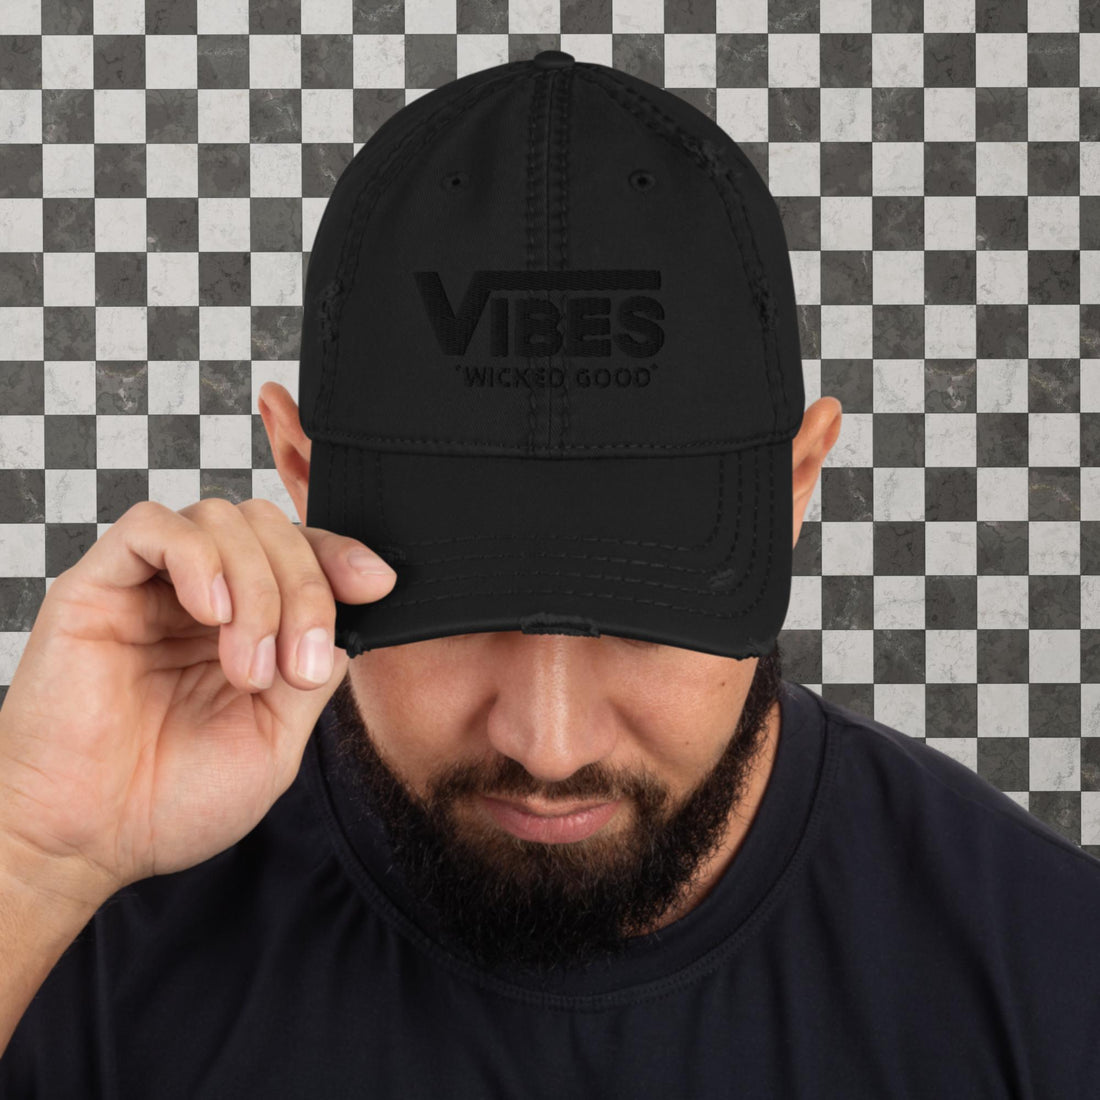 VIBES &quot;WICKED GOOD&quot; Vans style distressed hat multiple color options